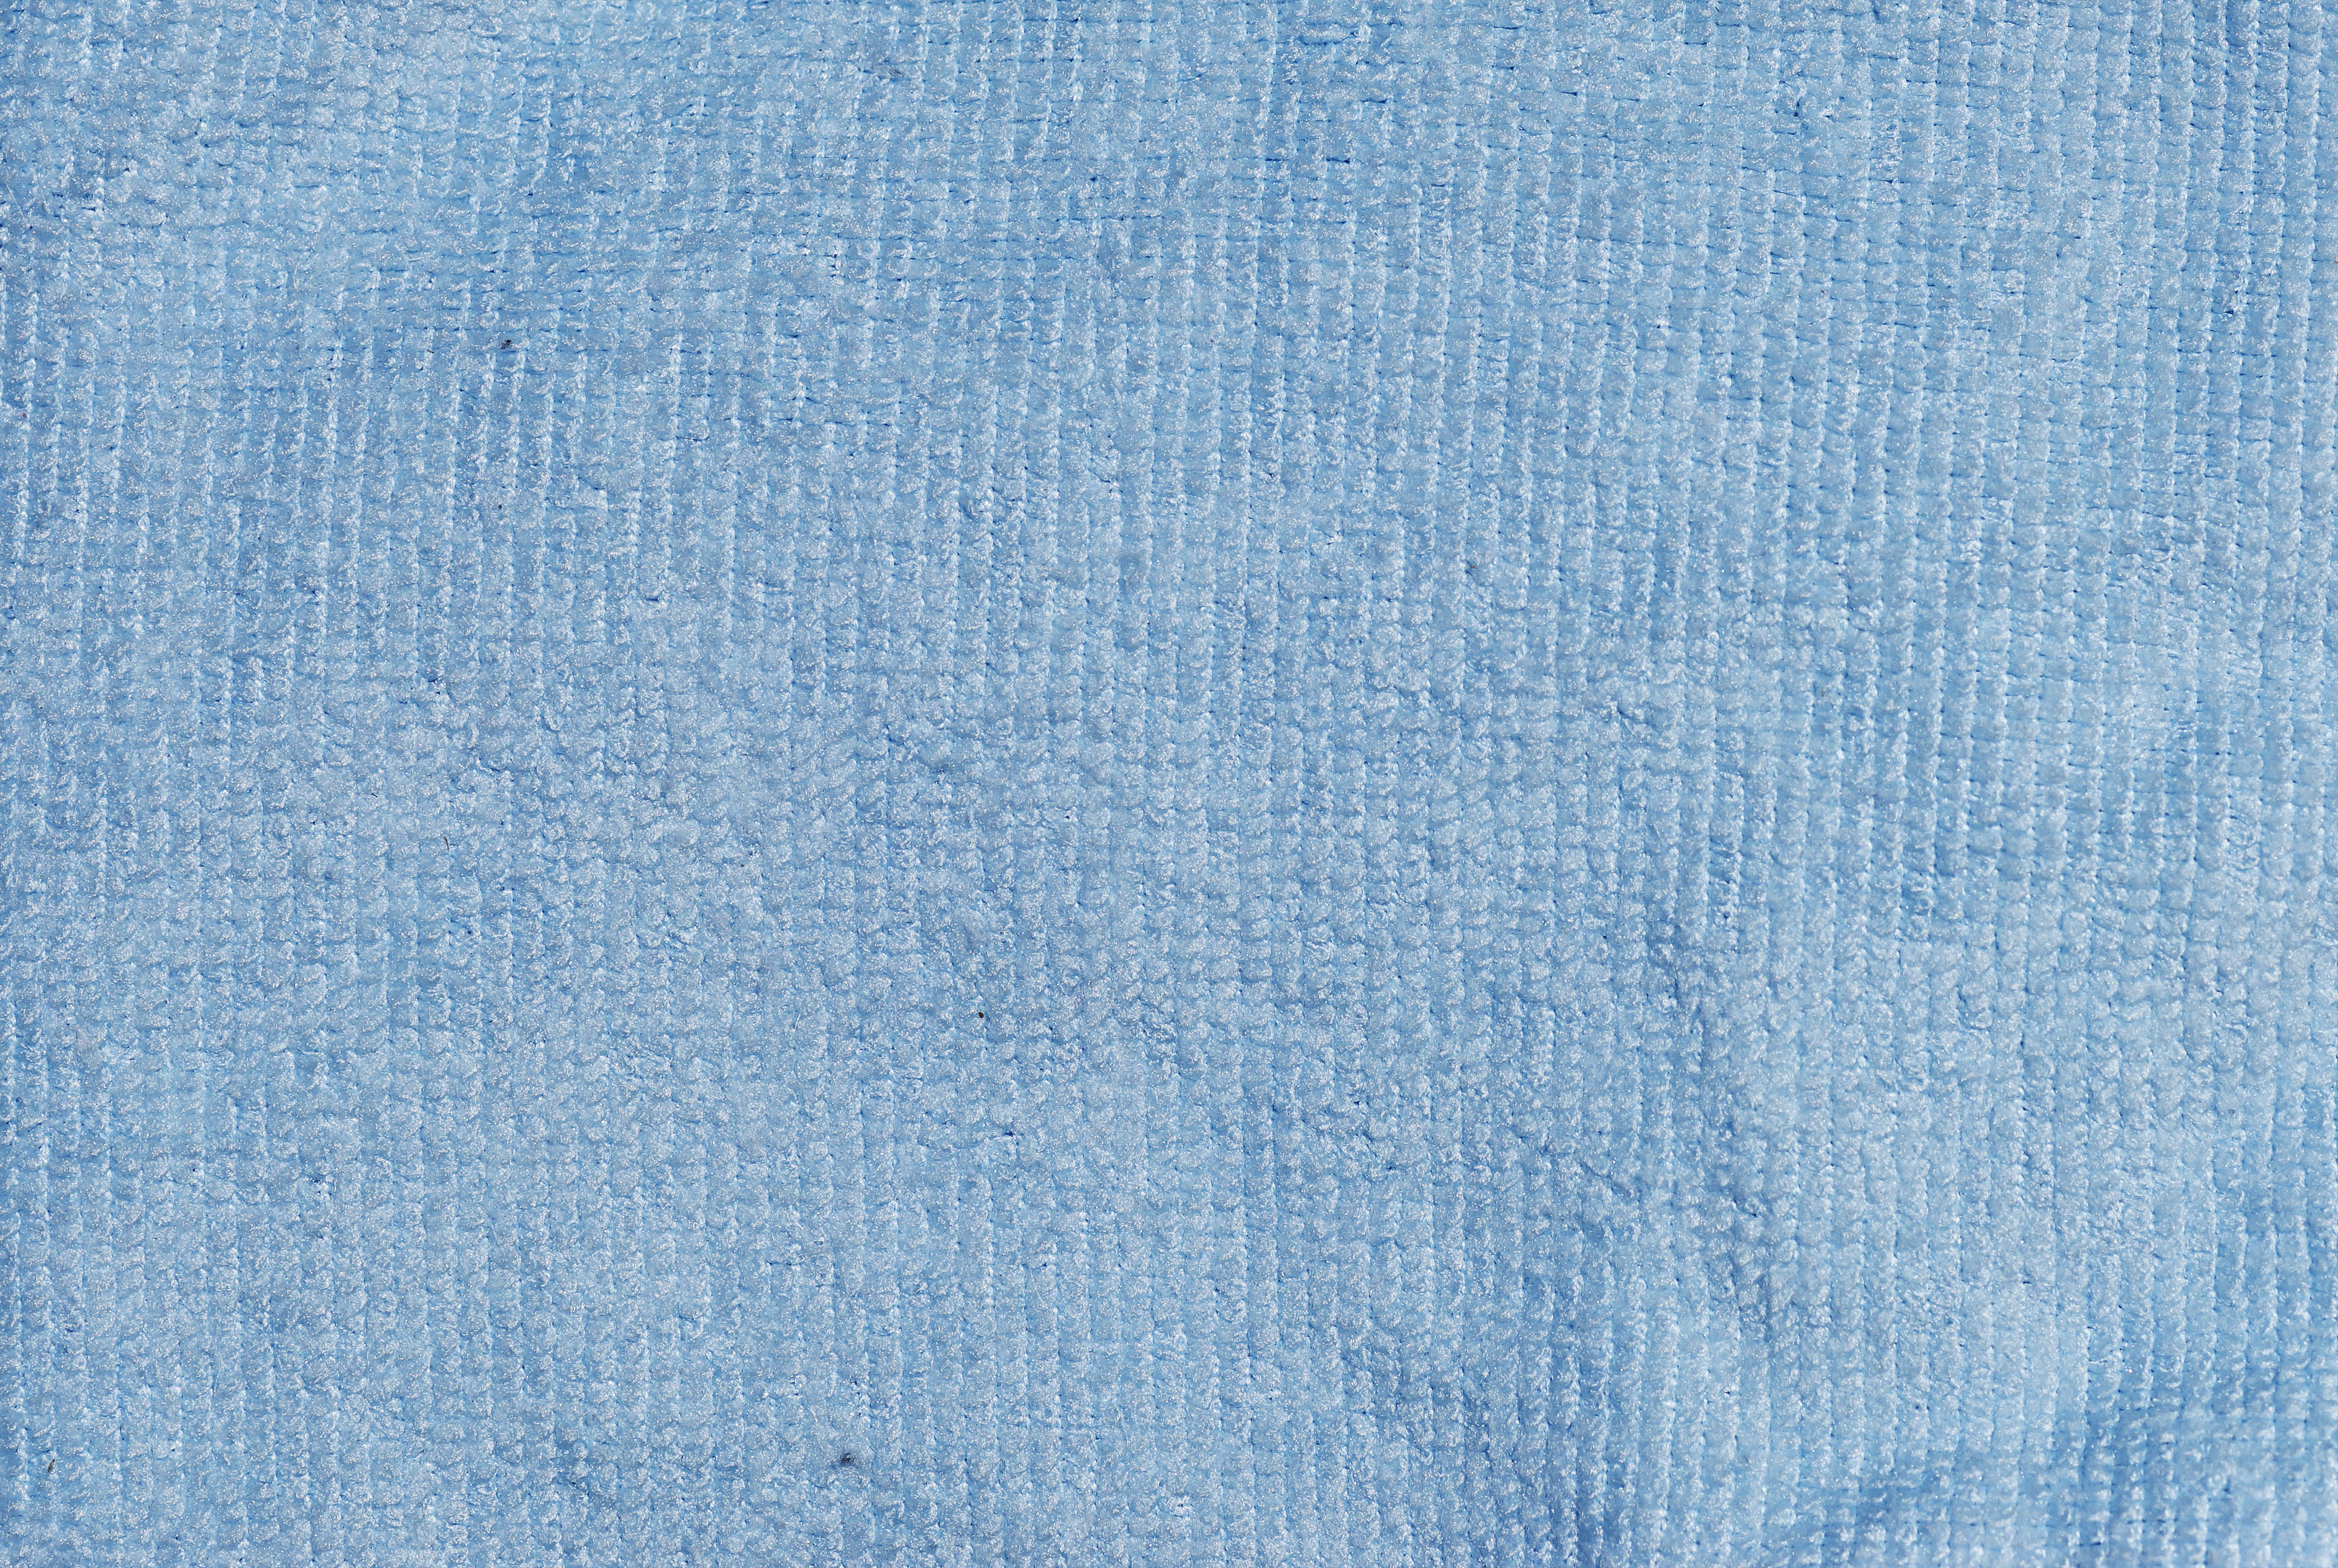 Two free cloth towel texture images | www.myfreetextures ...
